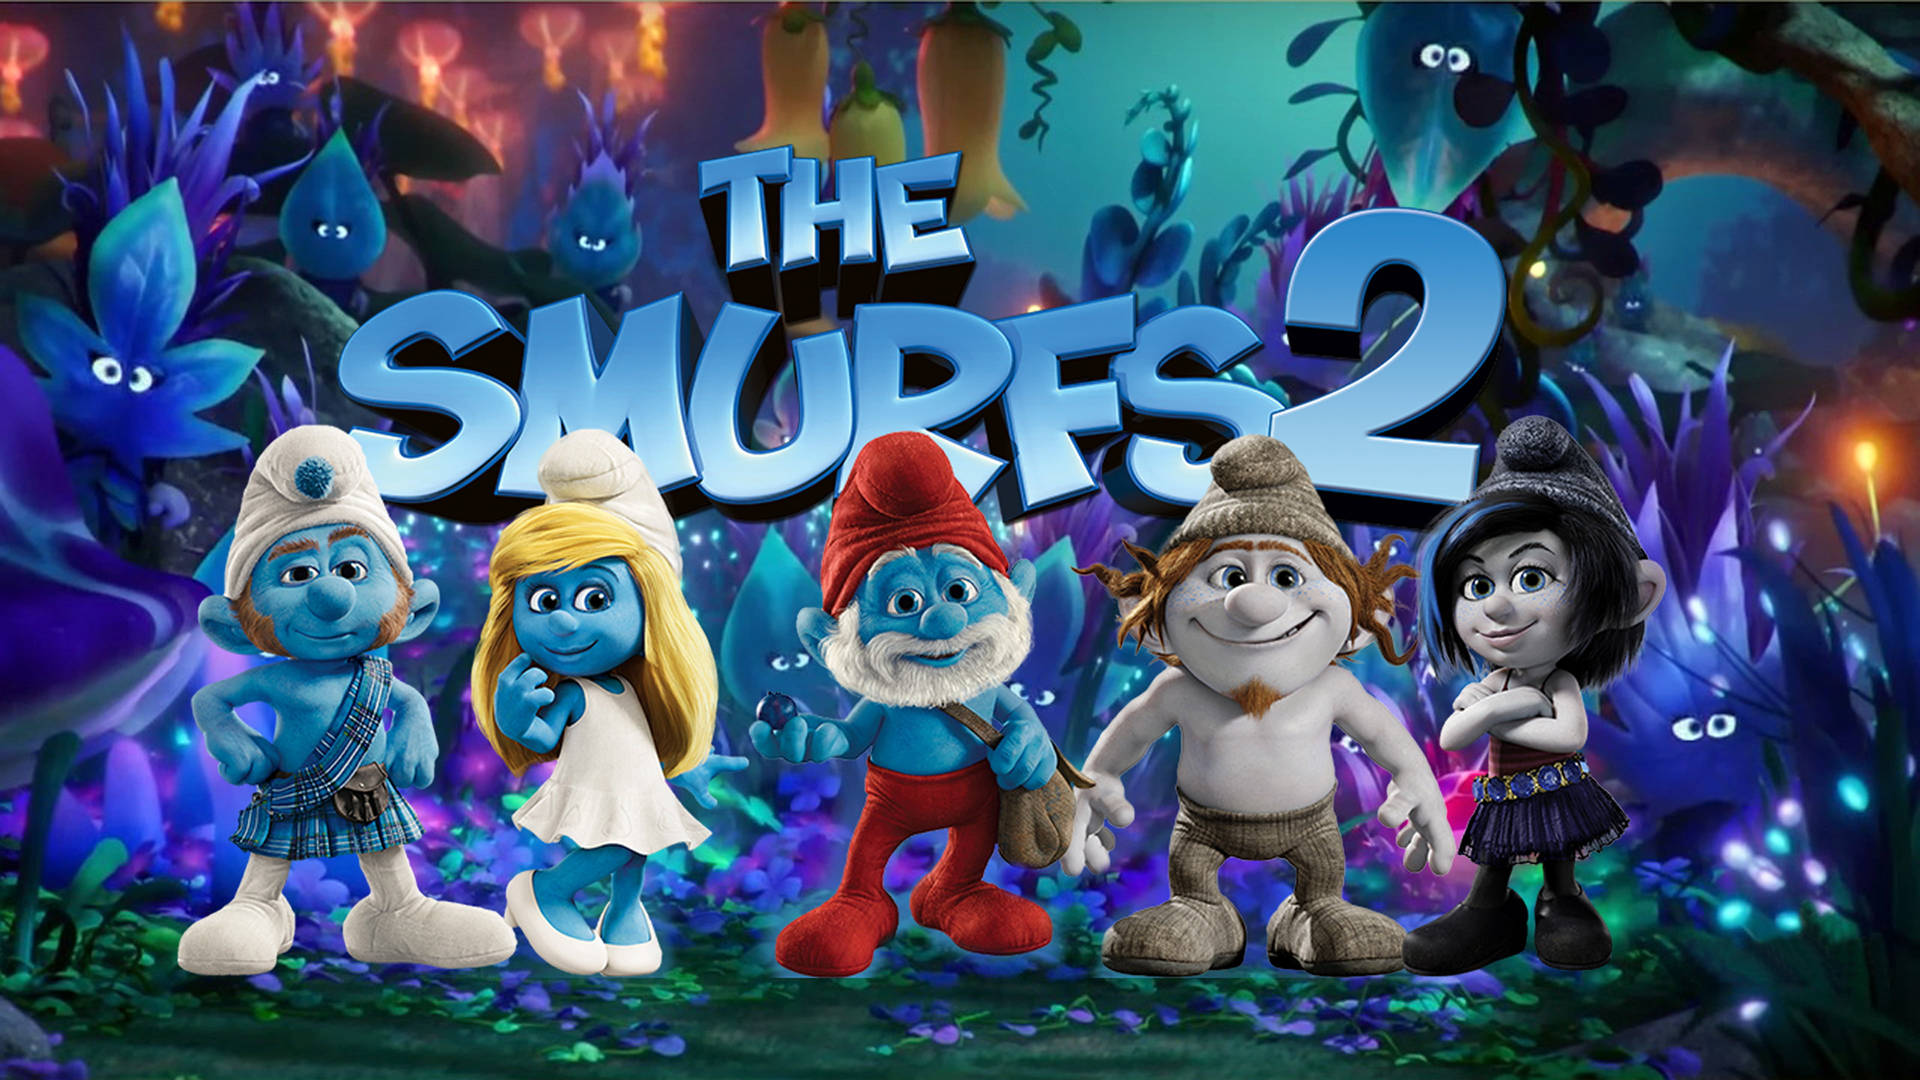 The Smurfs 2 Lost Village Poster